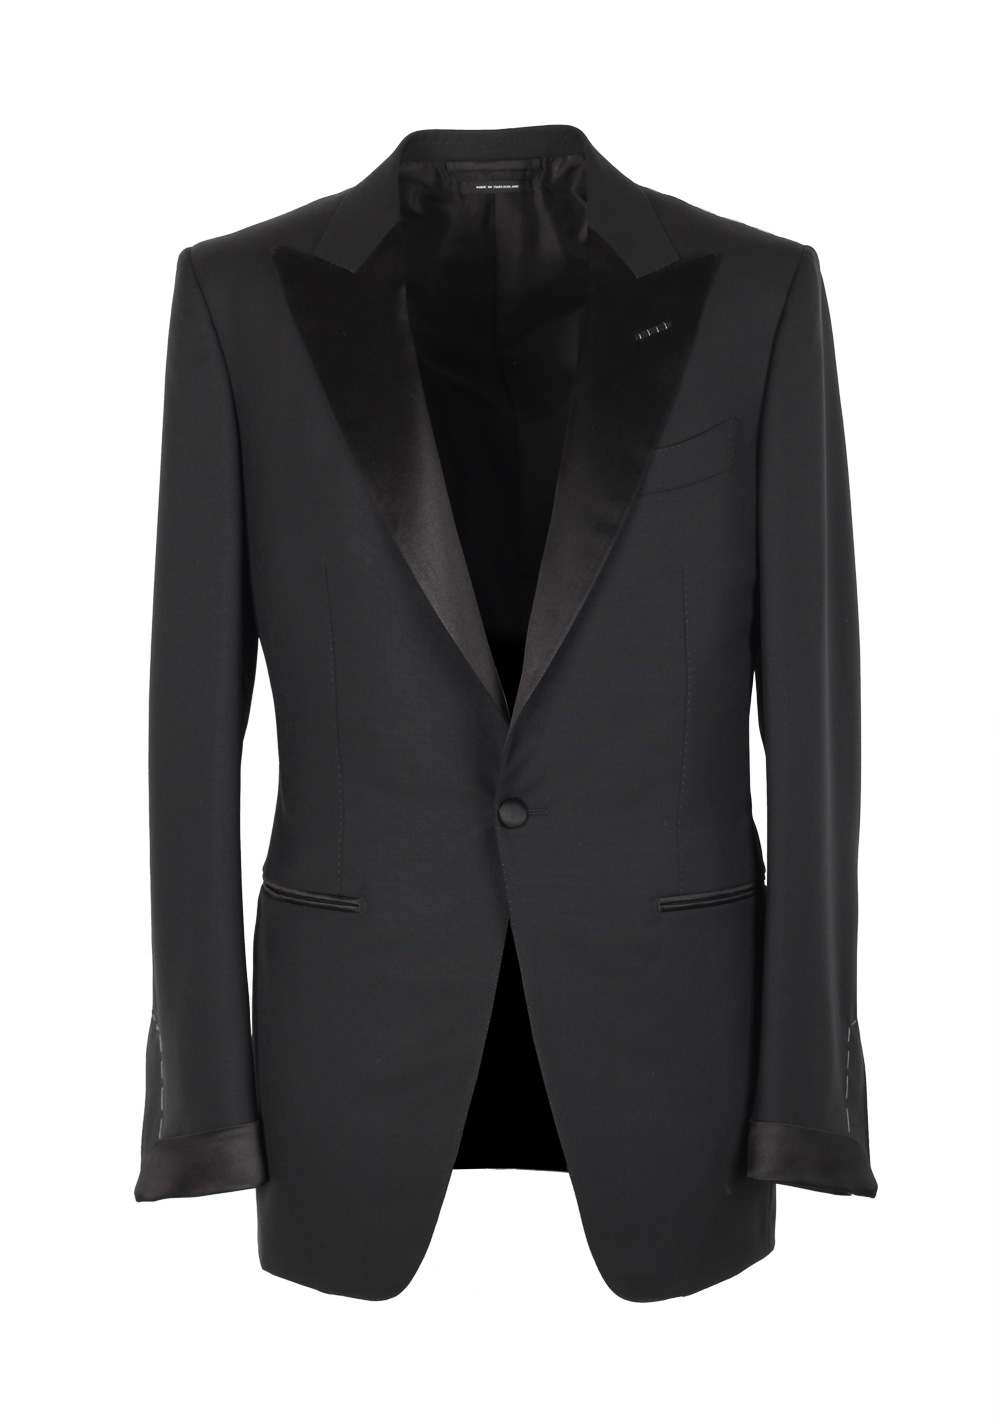 TOM FORD O’Connor Black Tuxedo Smoking Suit Size 46 / 36R U.S. Fit Y ...